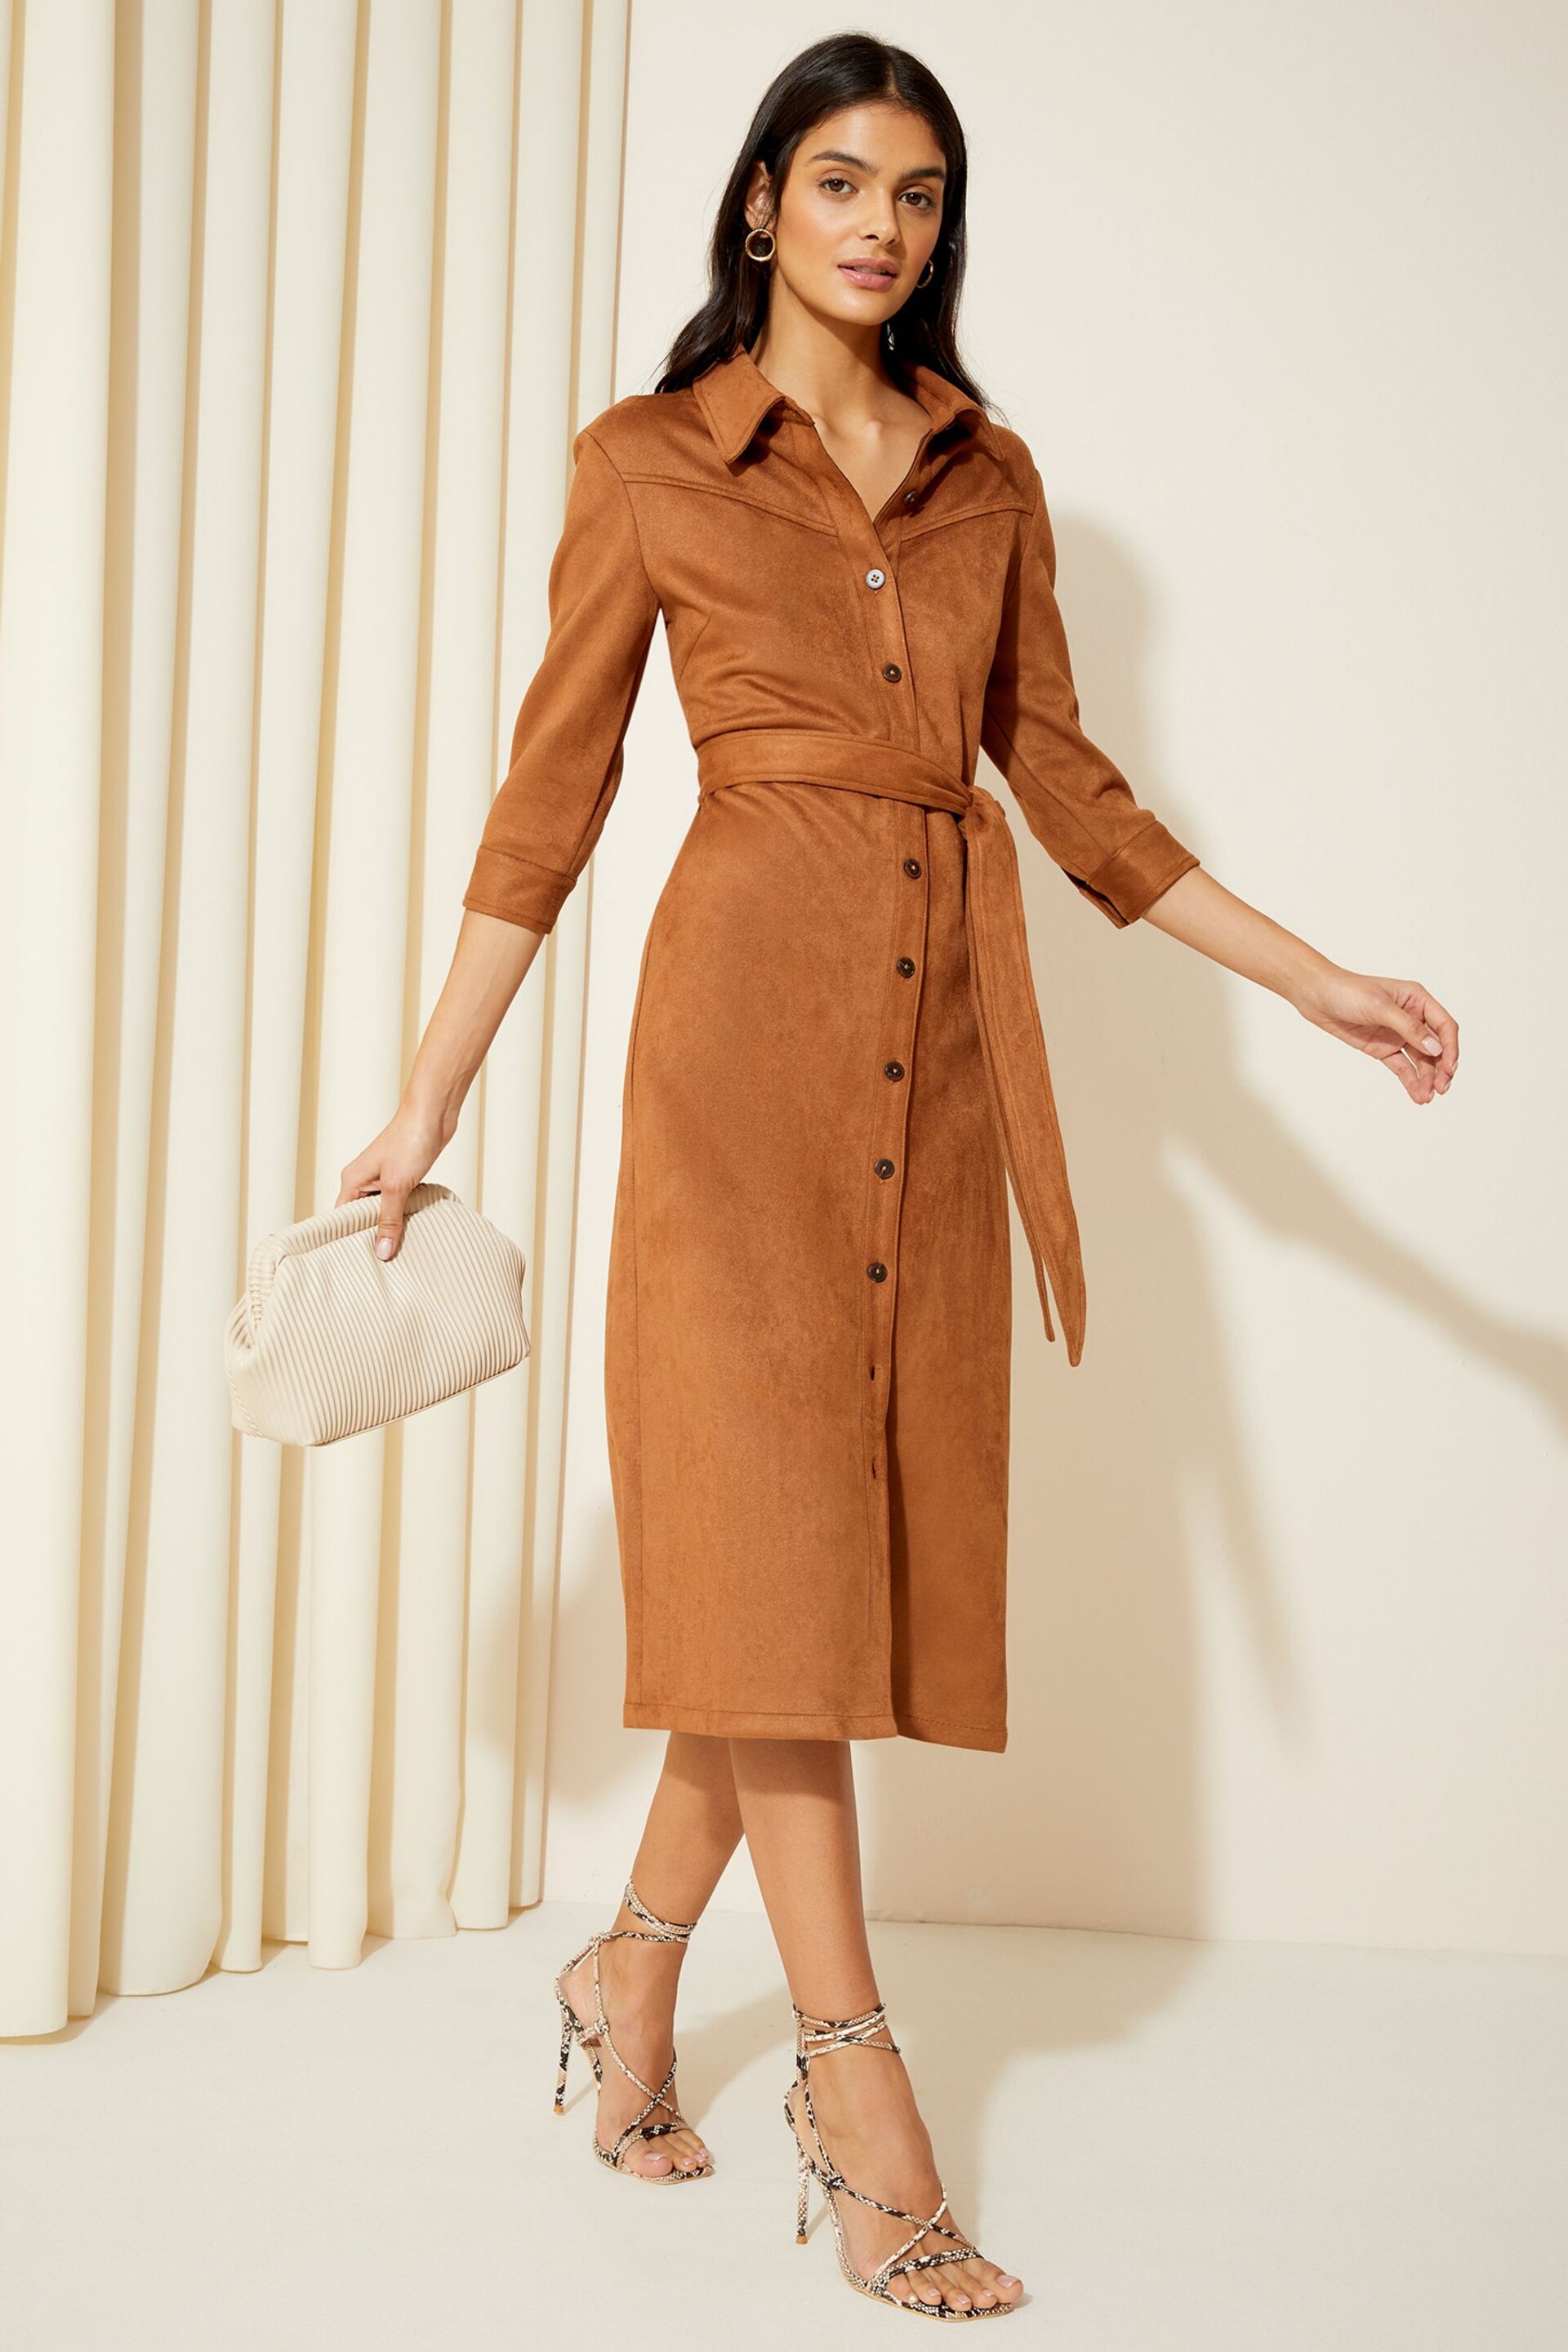 Friends Like These Camel Suedette Maxi Dress - Image 3 of 4